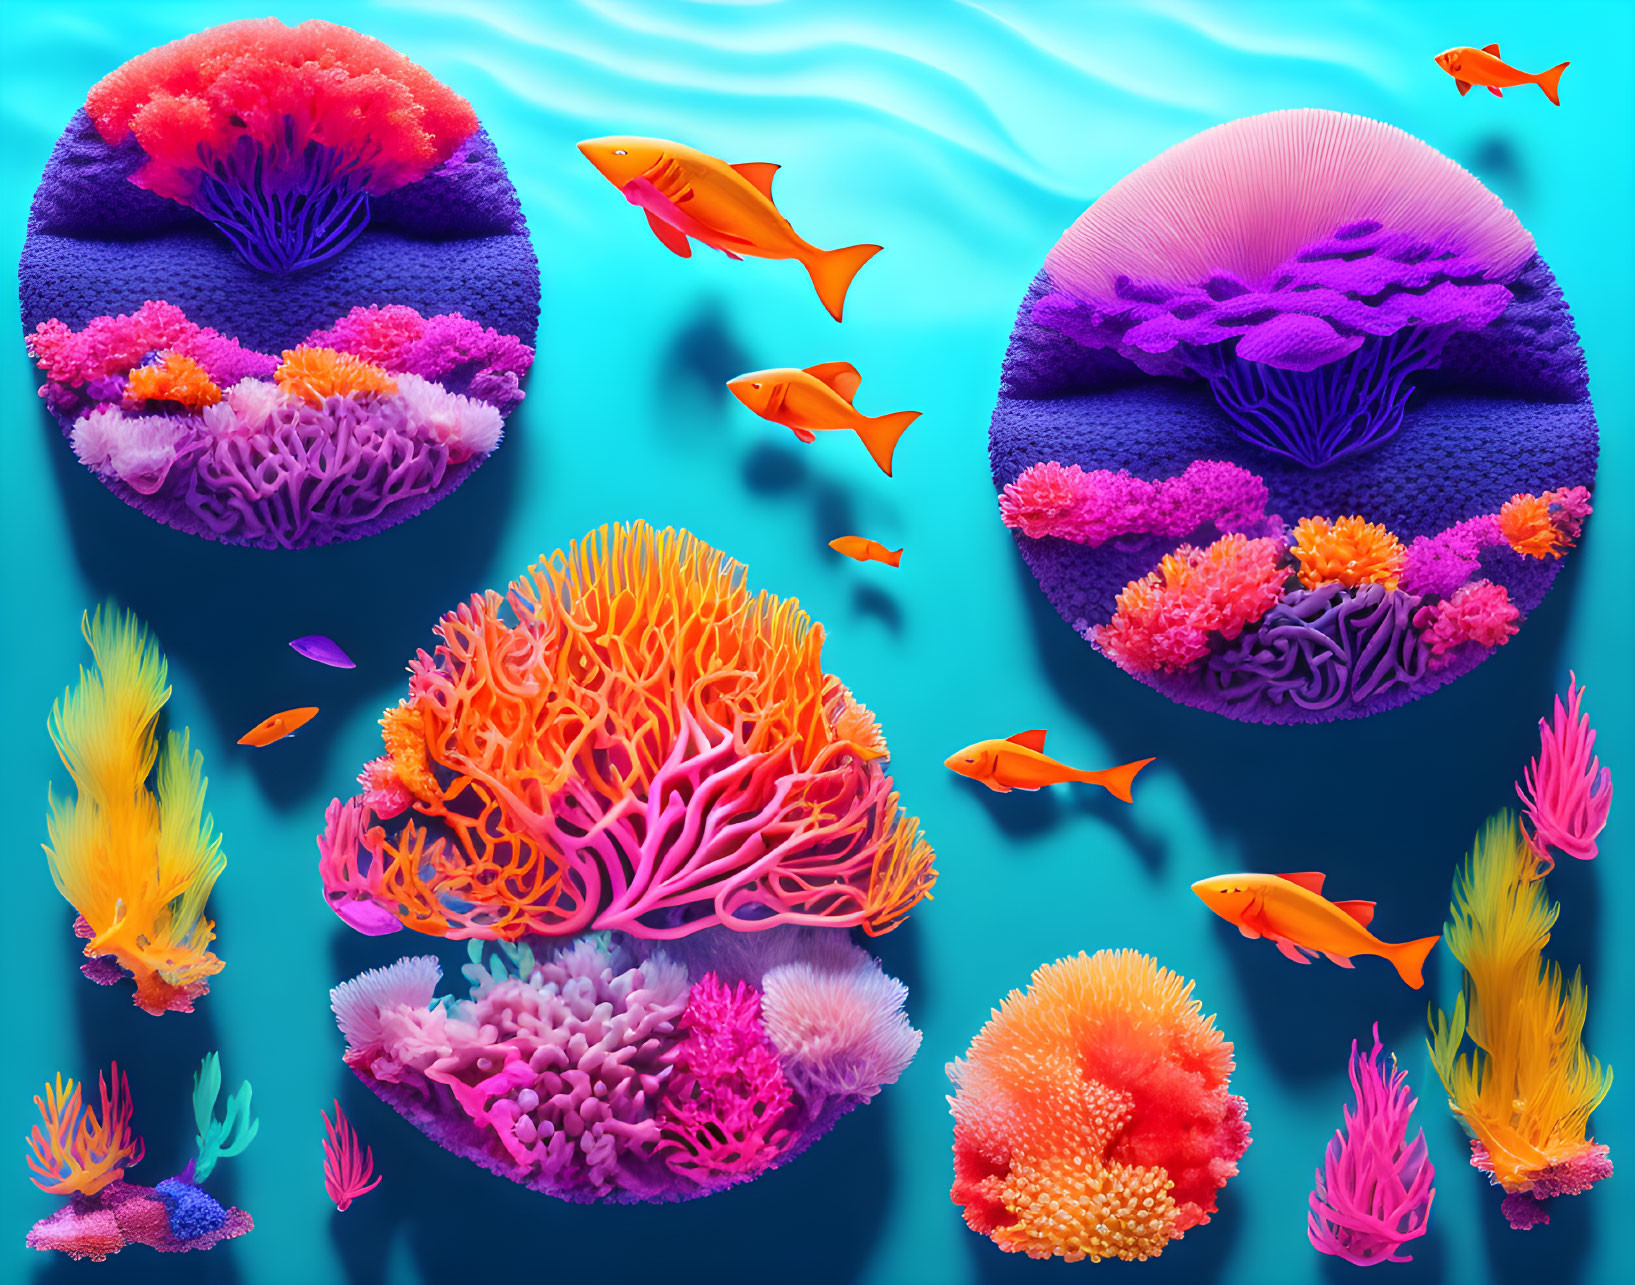 Colorful abstract underwater coral reef scene